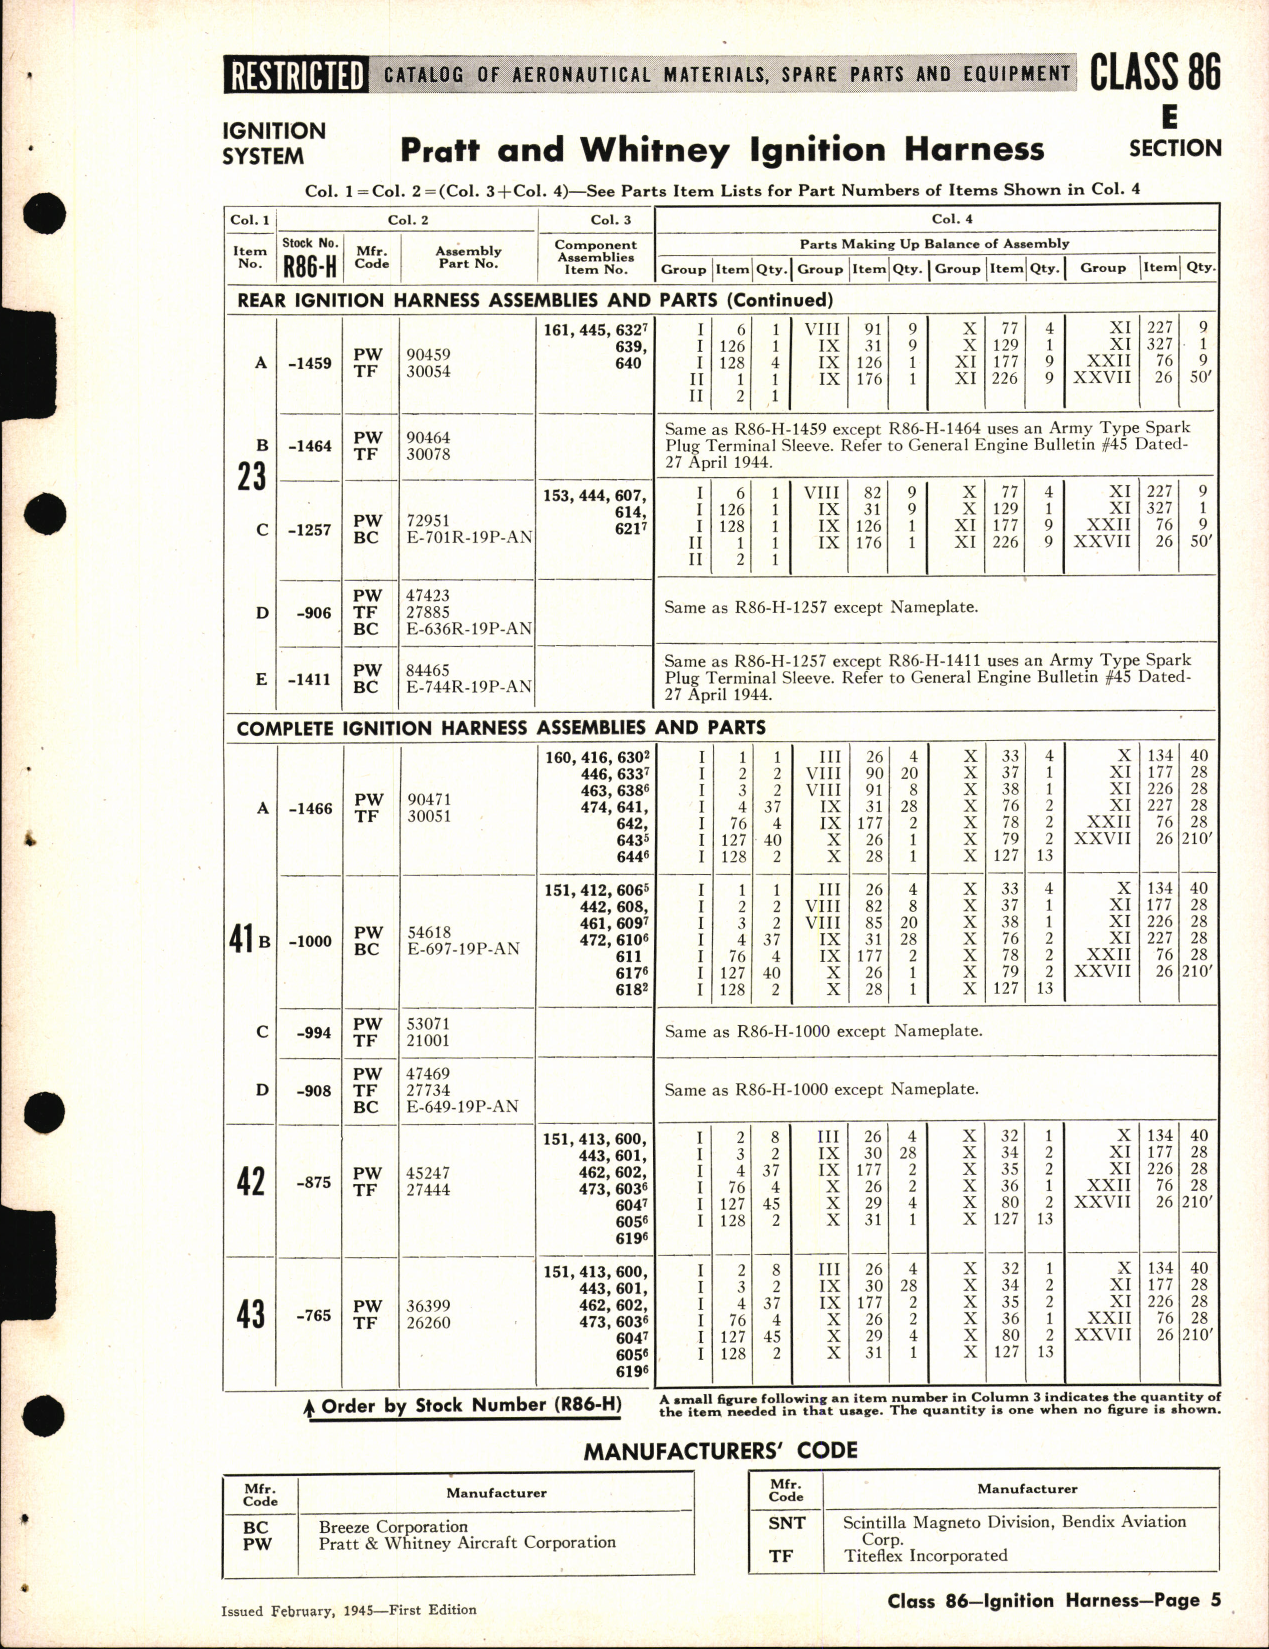 Sample page 5 from AirCorps Library document: Ignition System Harness Assemblies and Parts